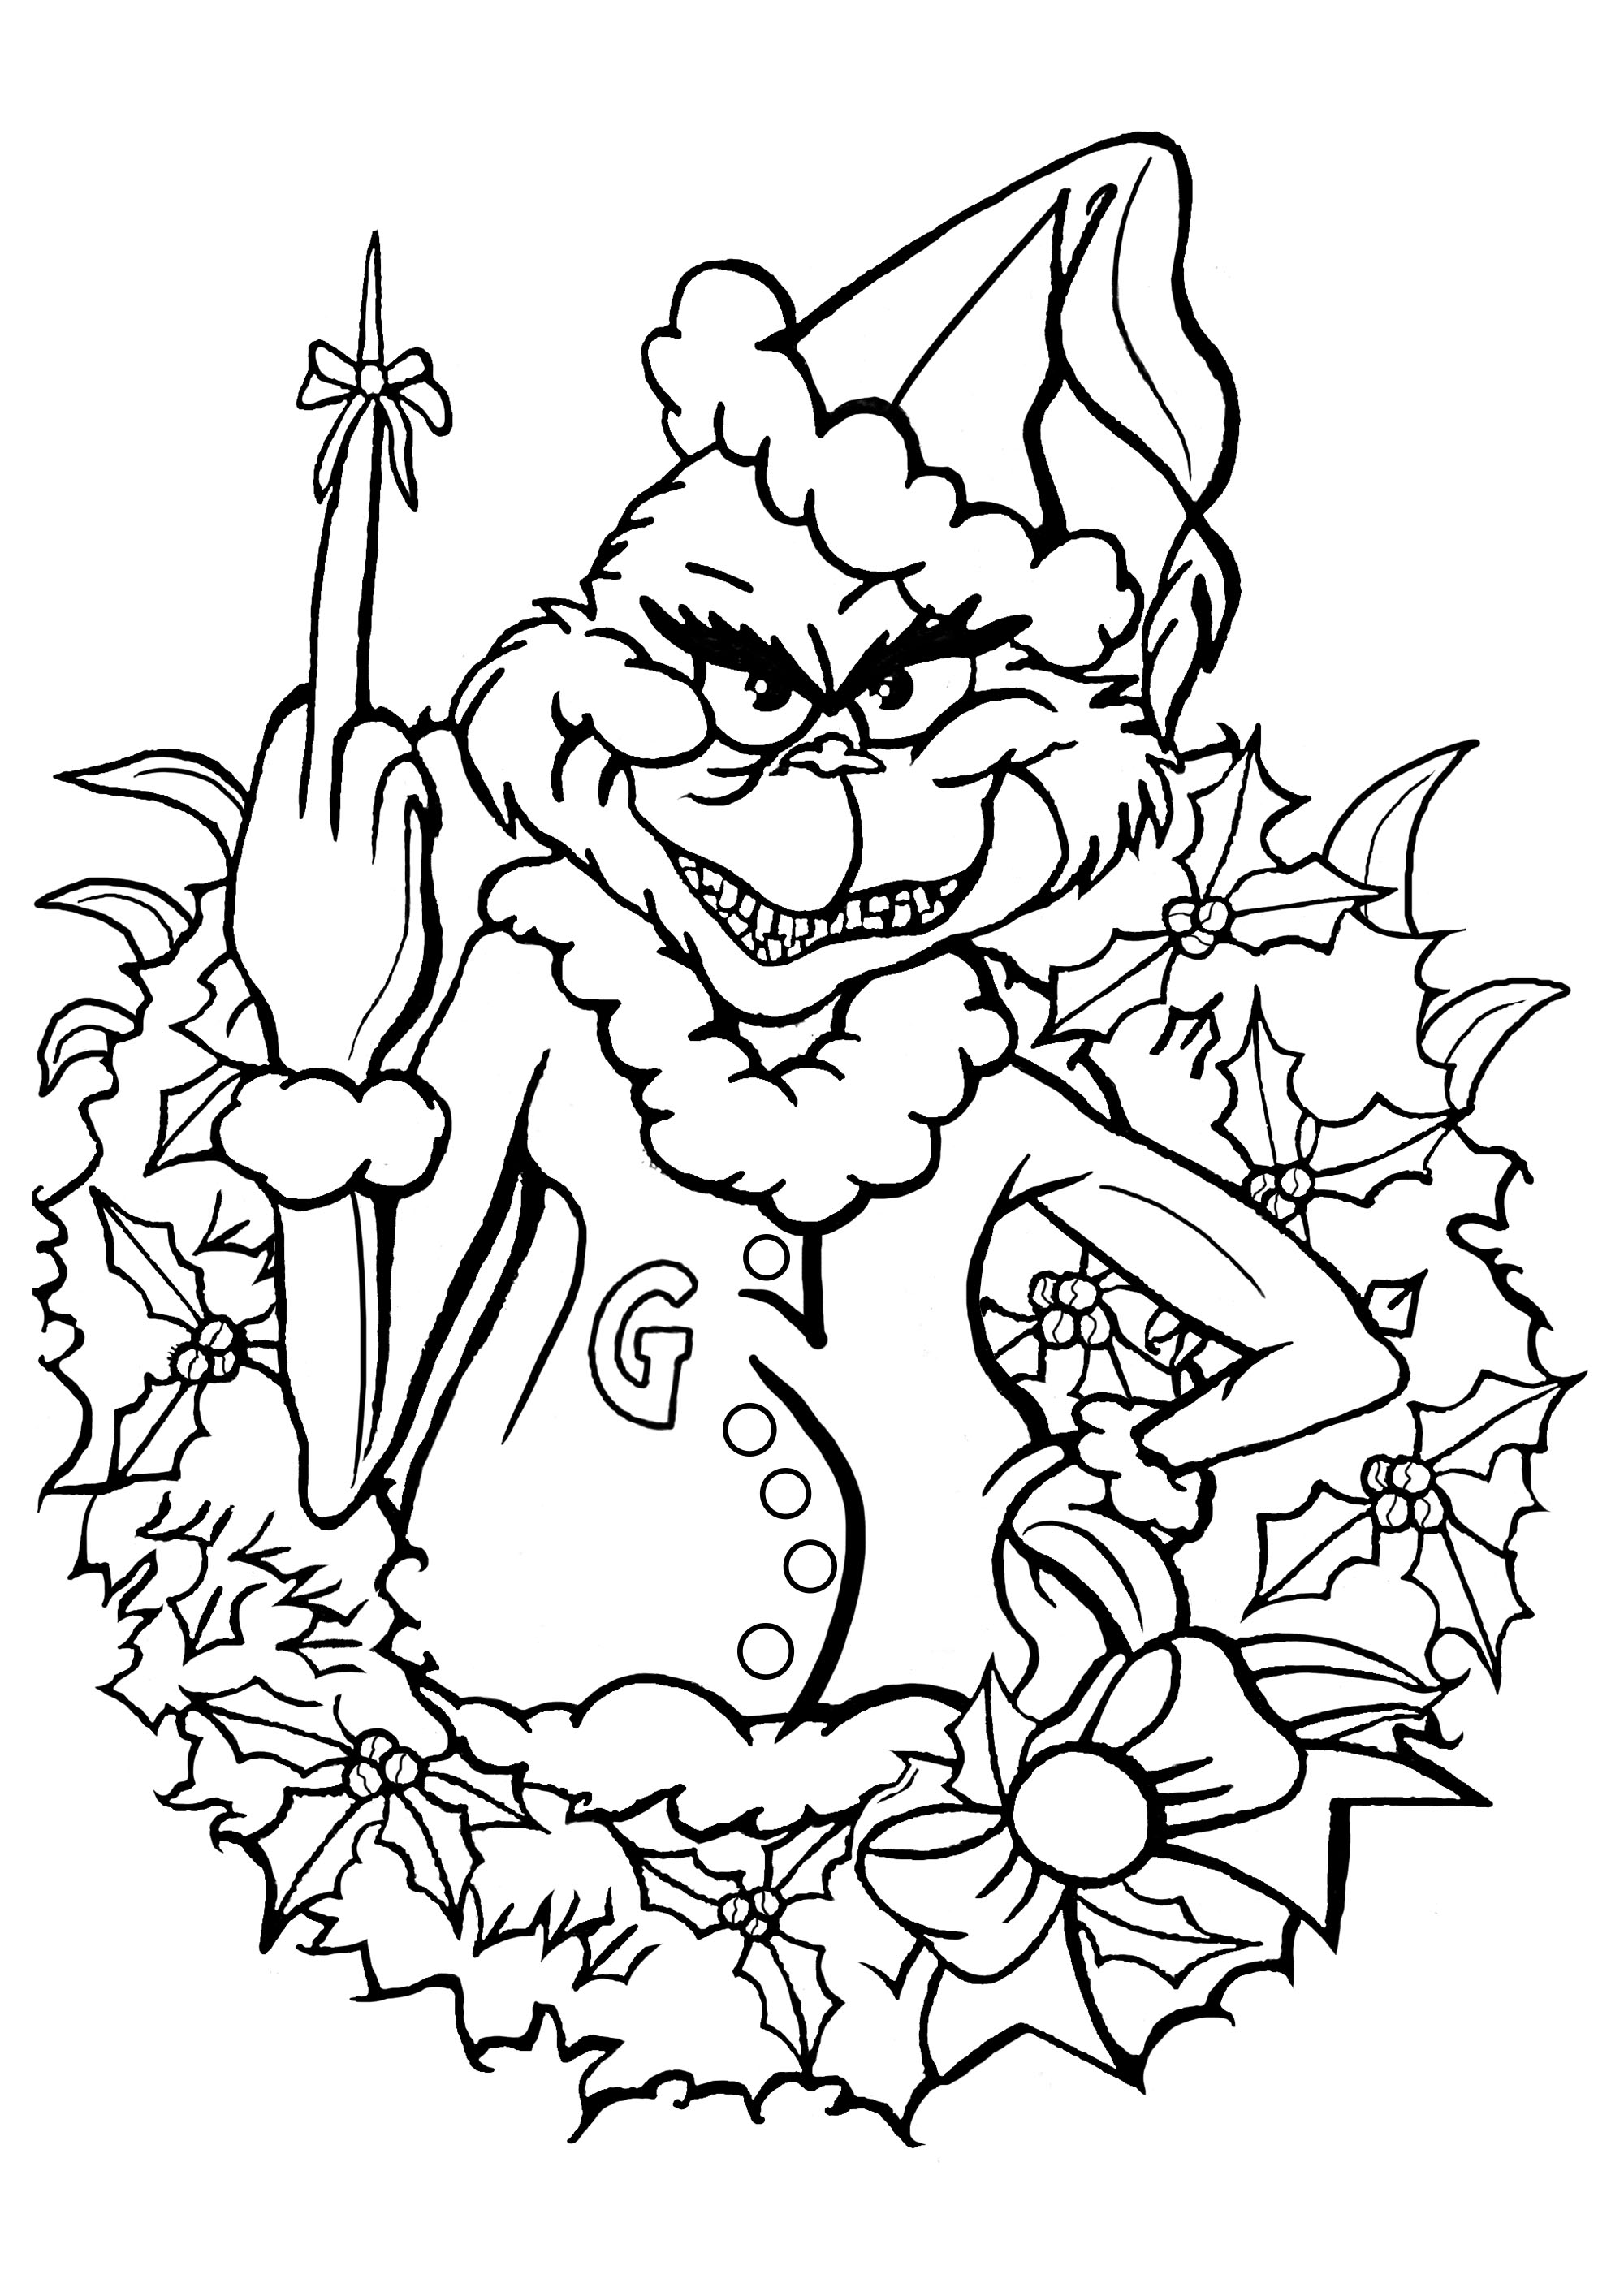 Scary Grinch With Wreath Coloring Page - Free Printable Coloring Pages